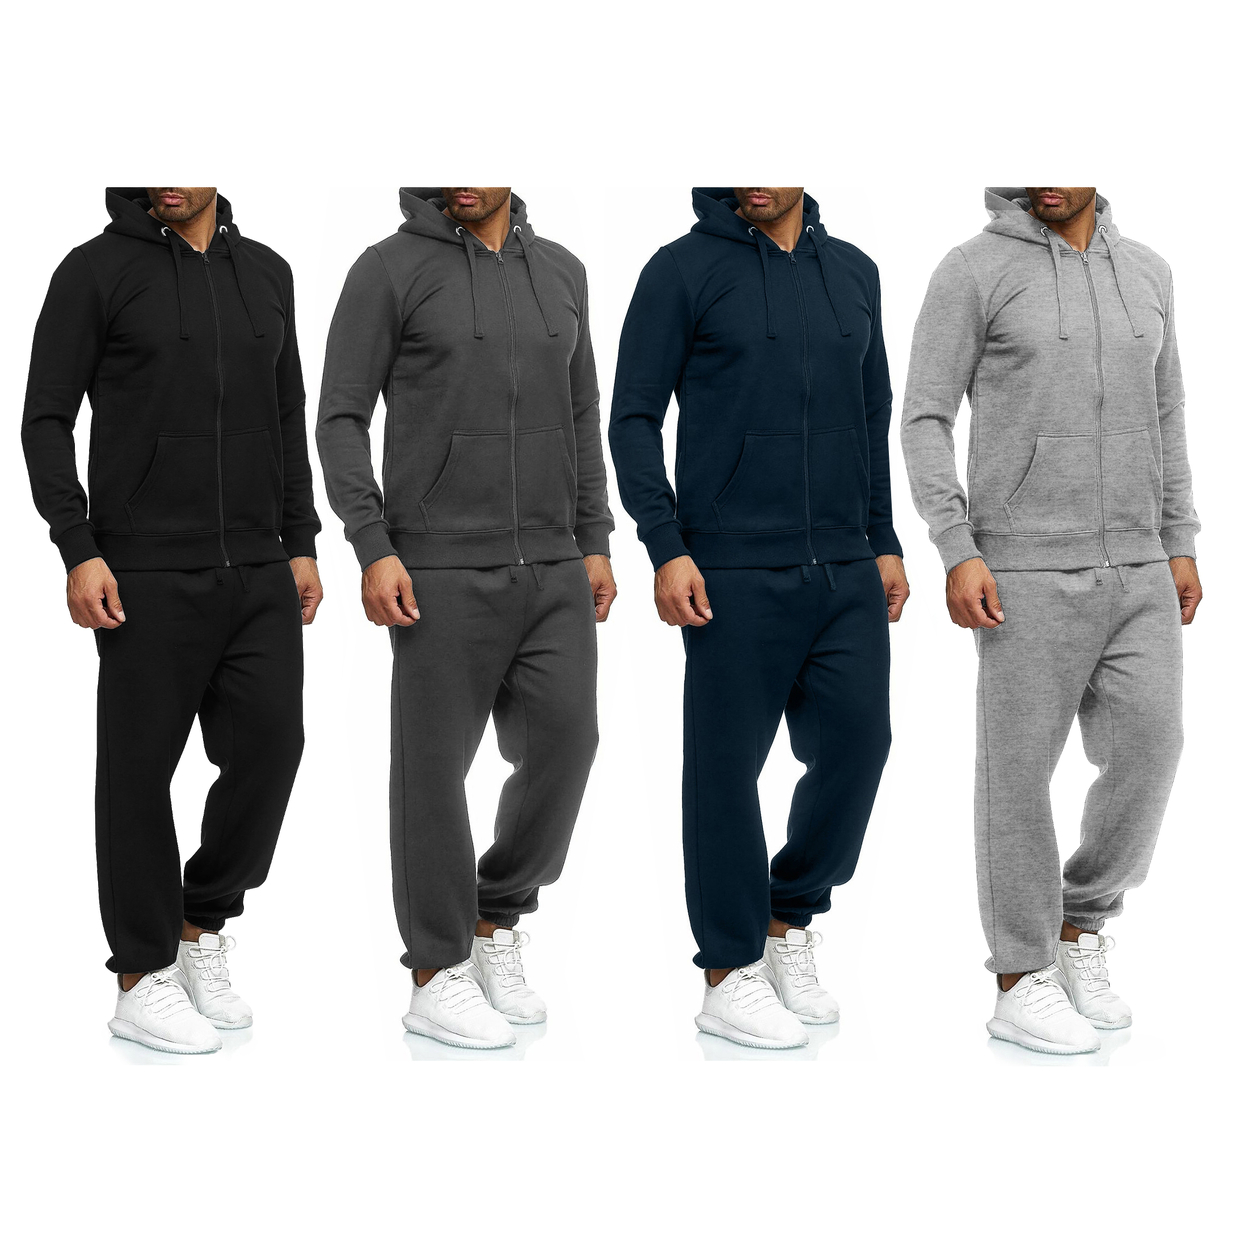 2-Pack: Men's Casual Big & Tall Athletic Active Winter Warm Fleece Lined Full Zip Tracksuit Jogger Set - Black, X-large